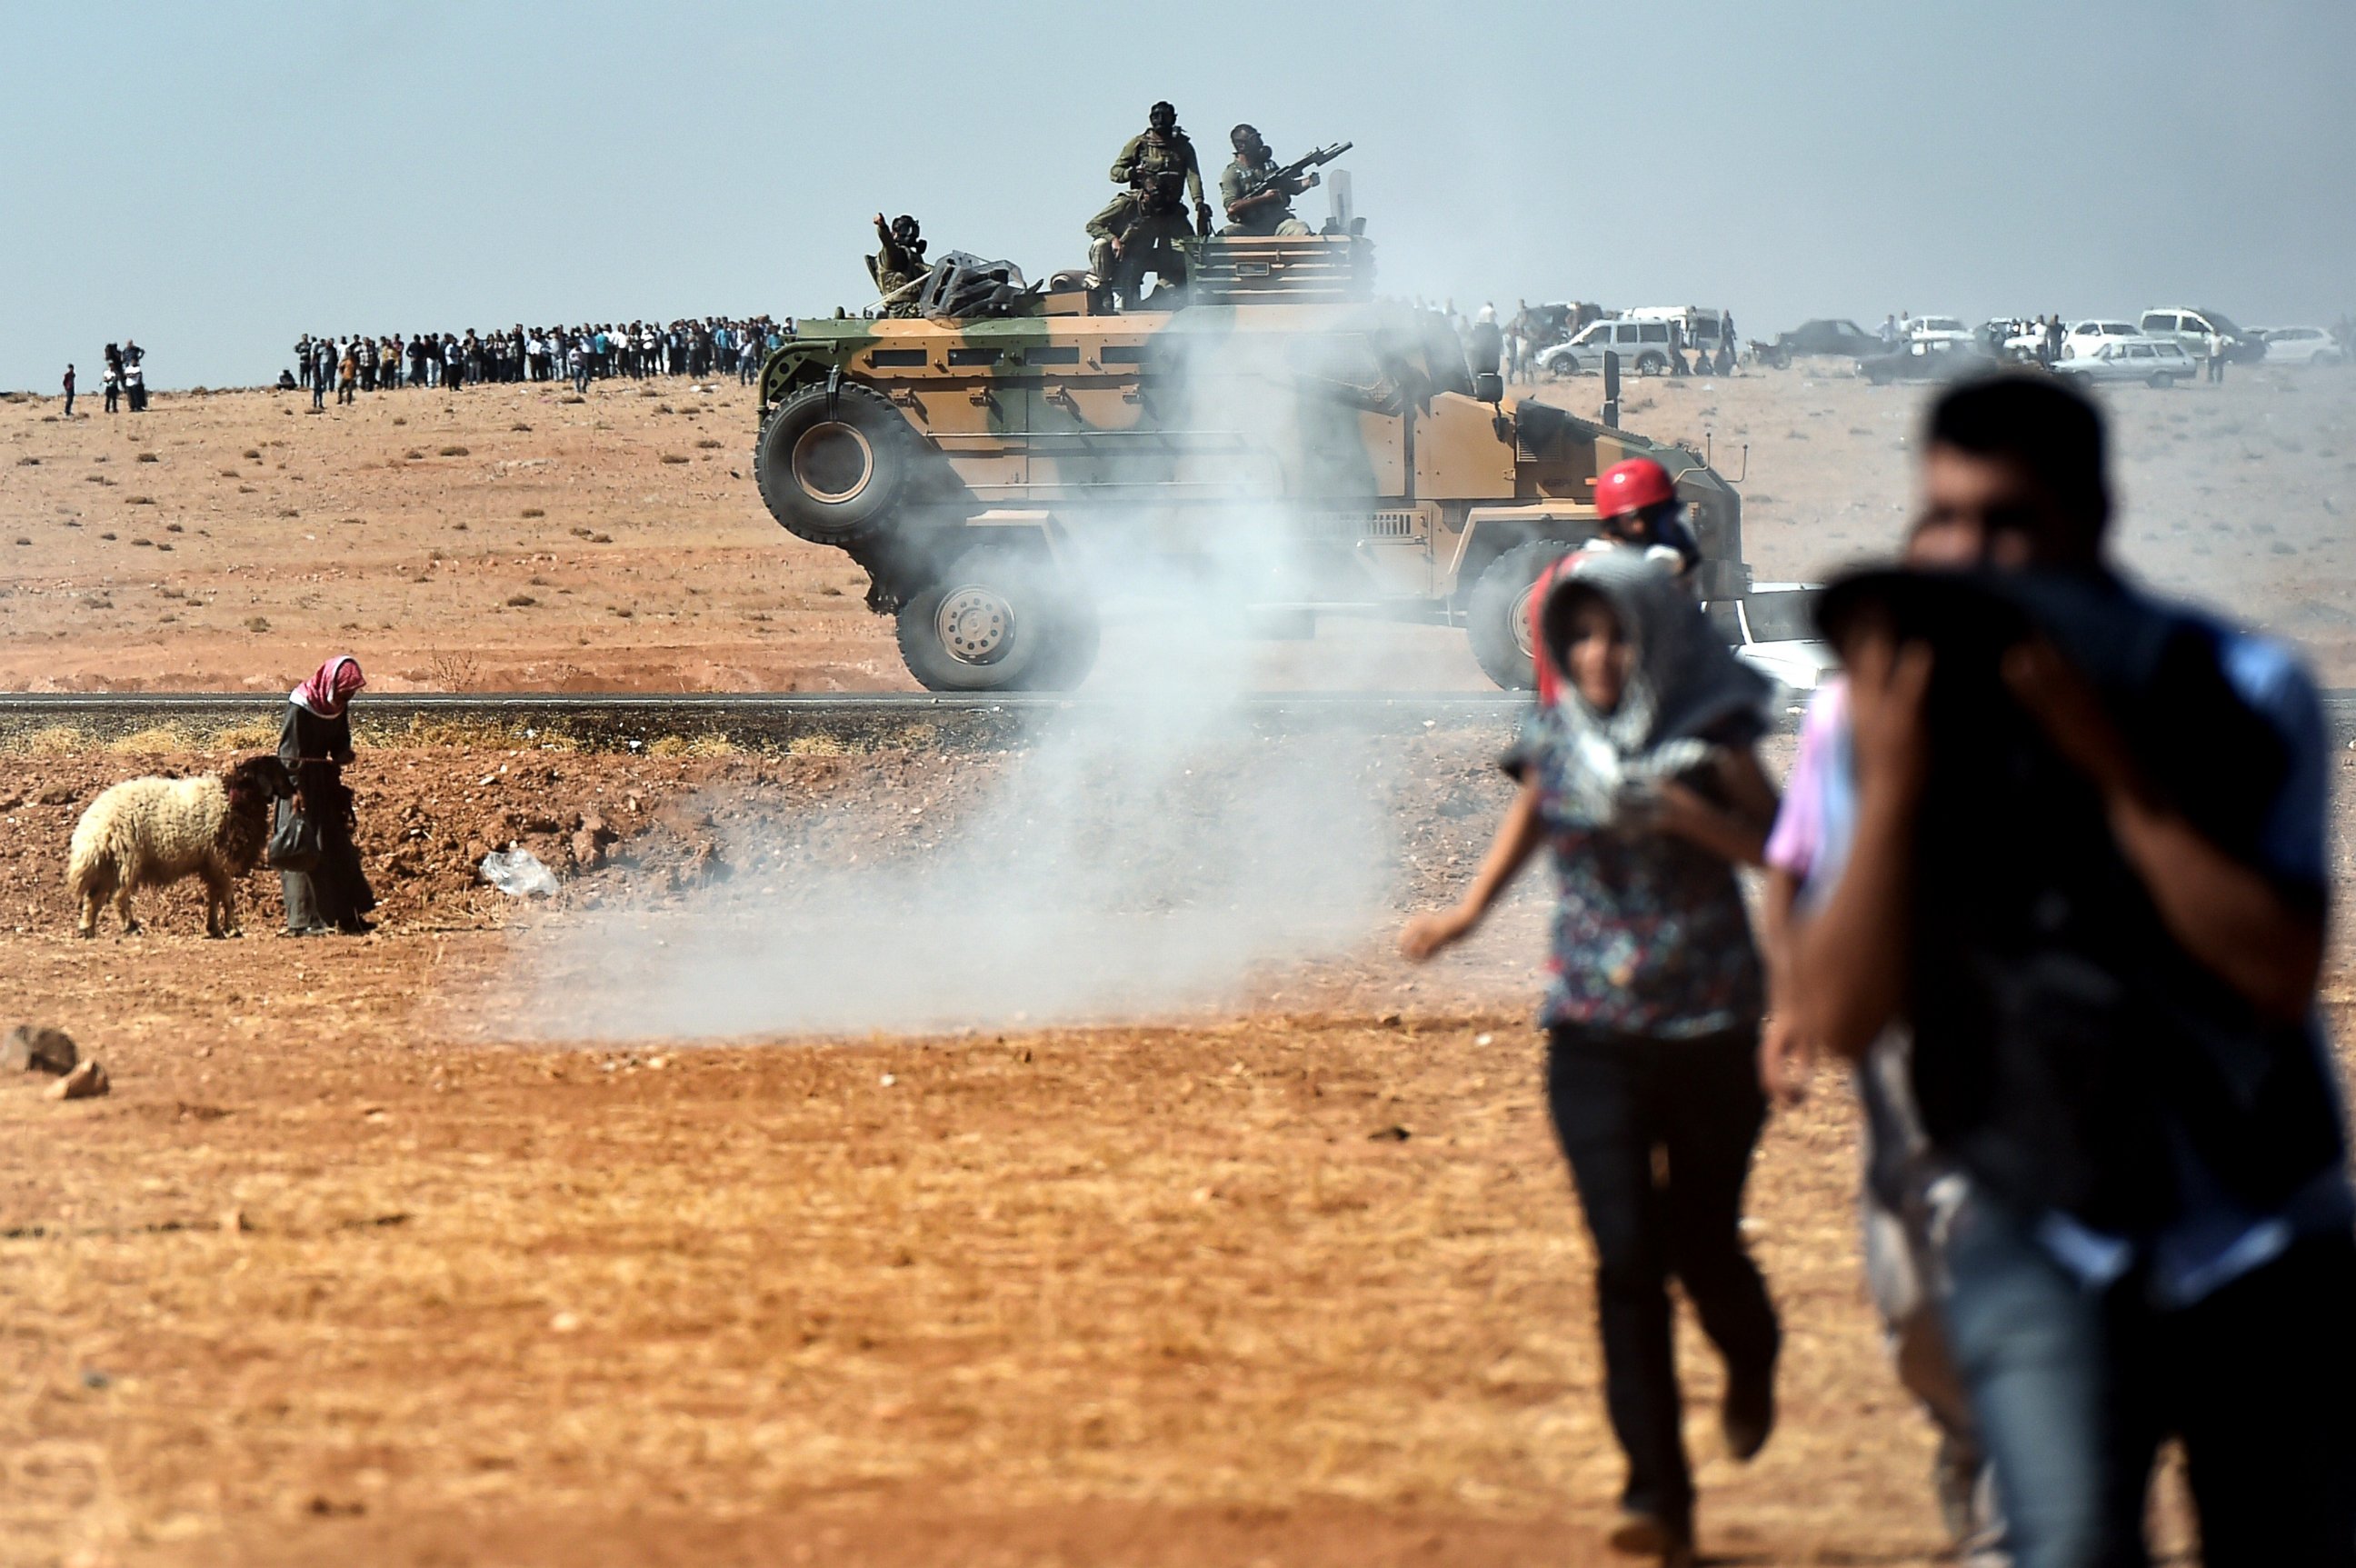 PHOTO: Kurdish people run away from tear gas as Turkish army tries to remove them from the Turkish-Syrian border area near the Syrian town known as Kobani by the Kurds, in the southeastern town of Suruc, Turkey, Oct. 7, 2014.